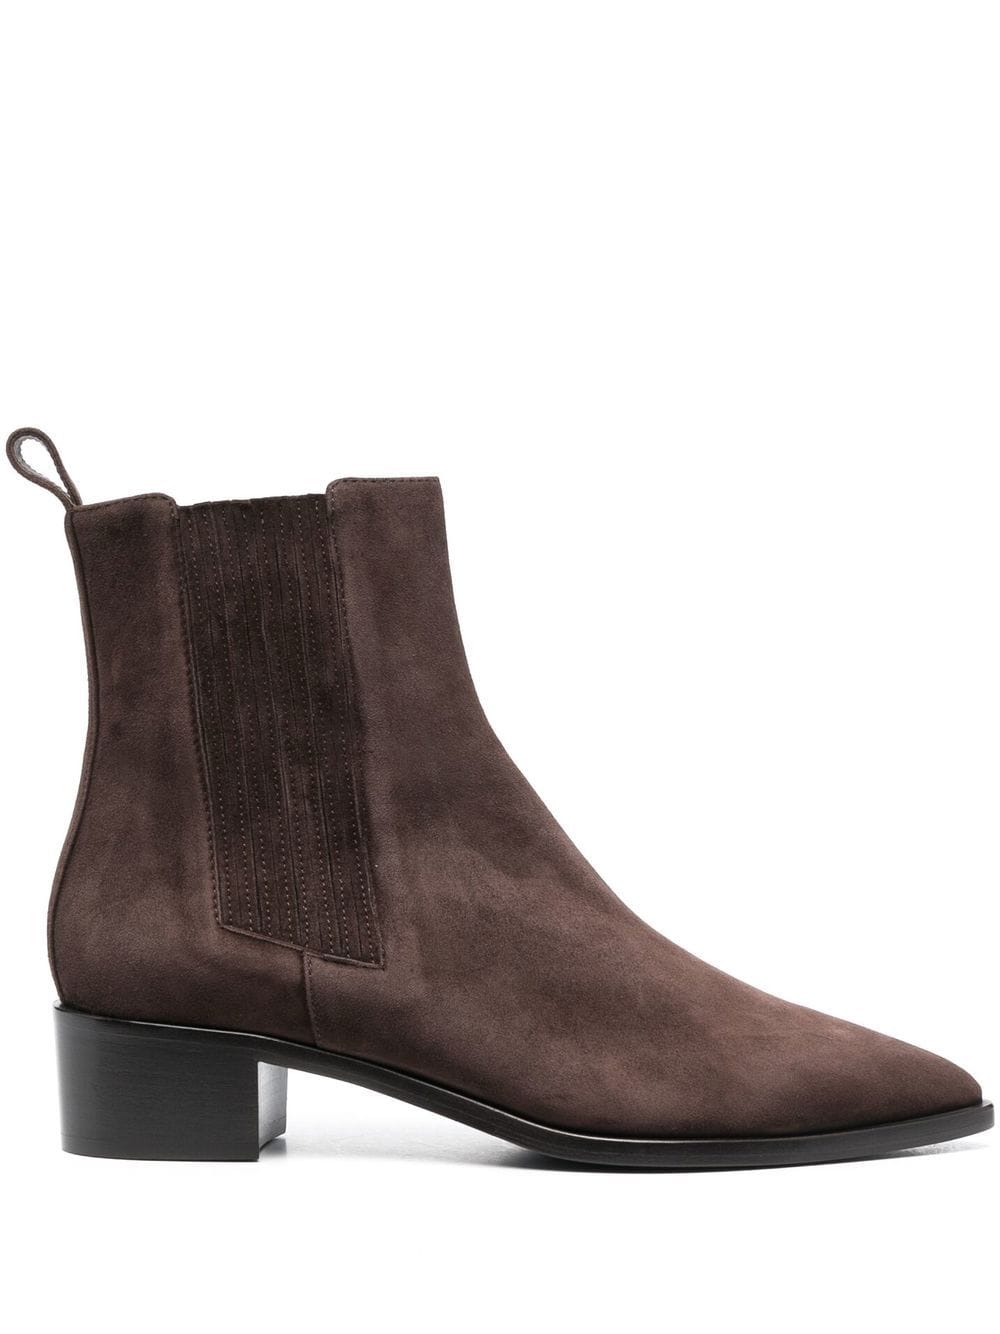 Scarosso Olivia suede ankle boots - Brown von Scarosso